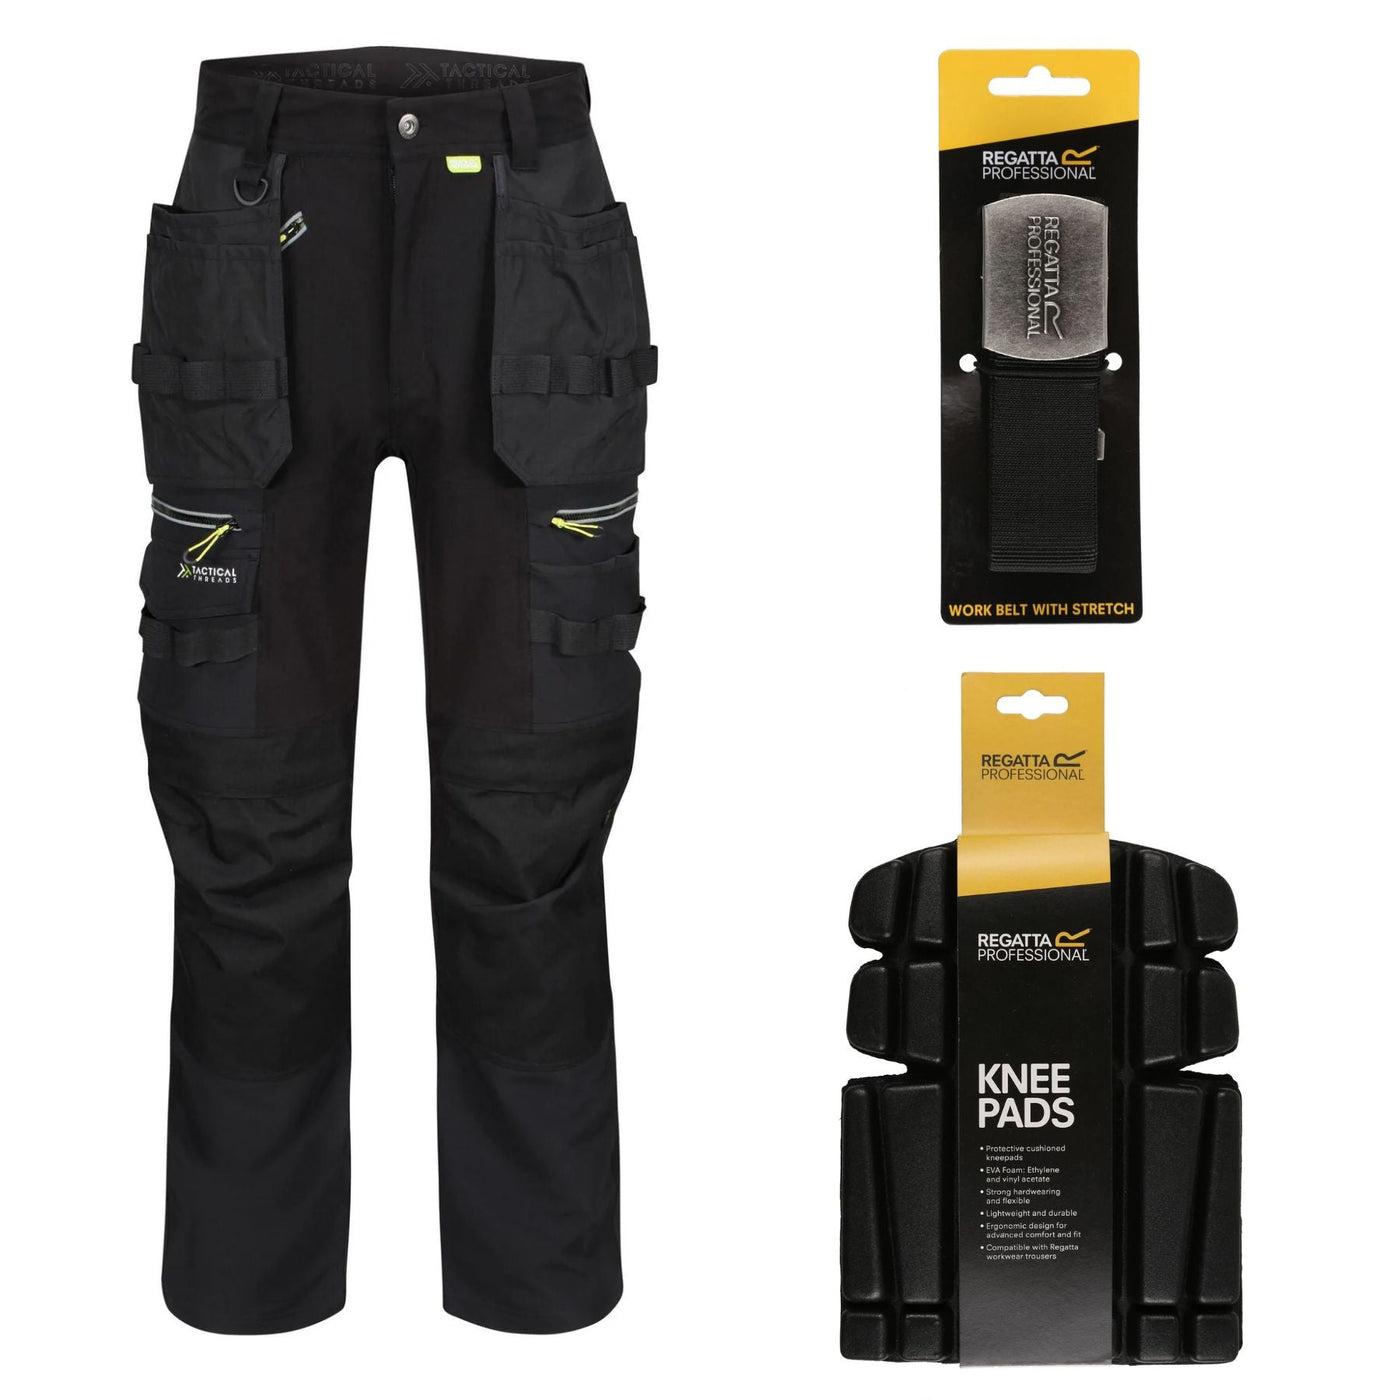 Regatta Professional Special Offer Pack - Mens Infiltrate Softshell Stretch Trousers + Belt + Knee Pads